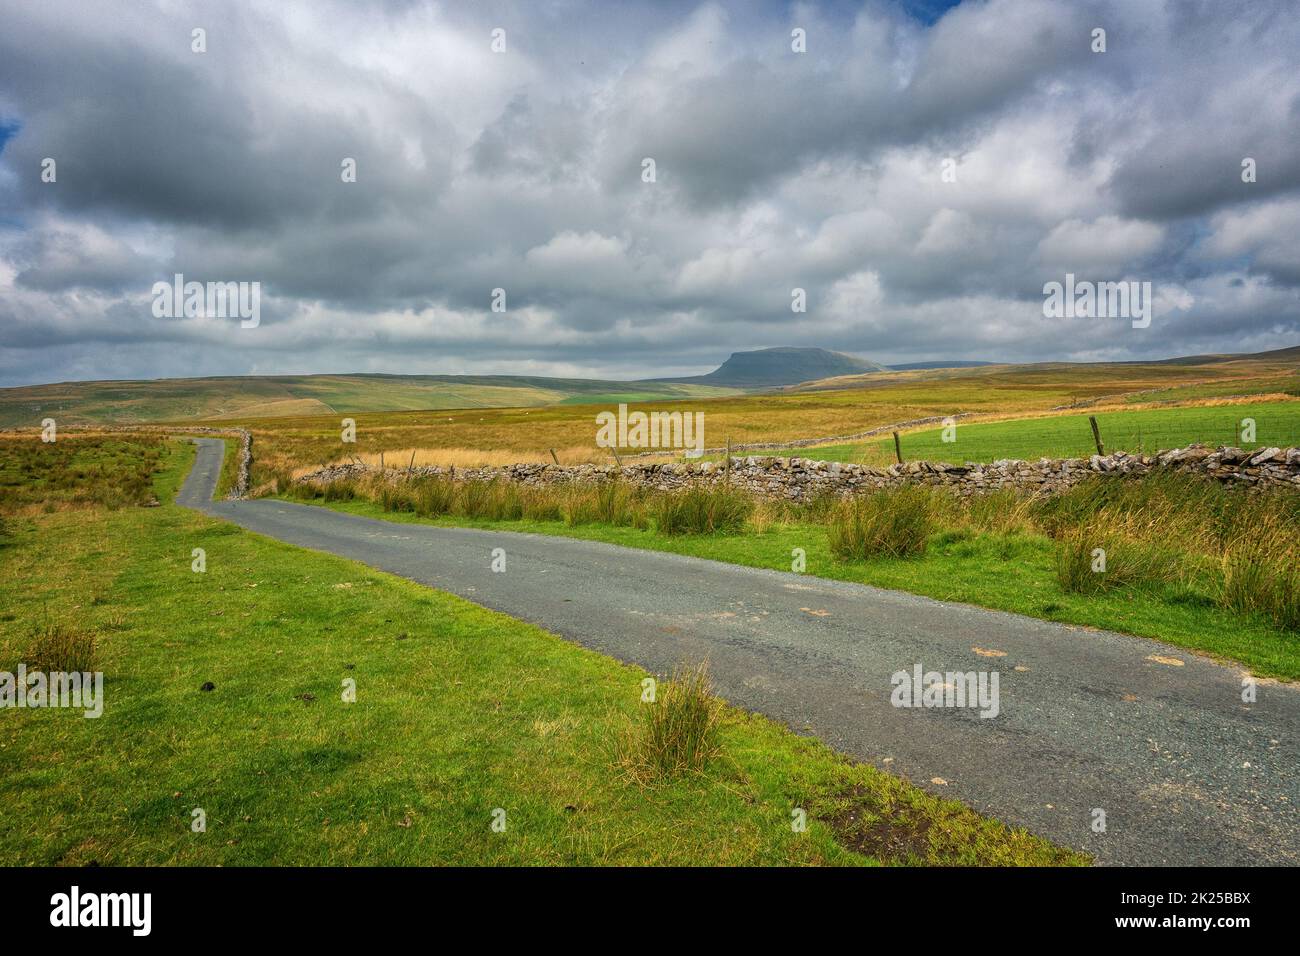 Country lane over Malham Moor looking towards Pen-y-ghent mountain, Yorkshire Dales National Park, North Yorkshire, England, UK Stock Photo